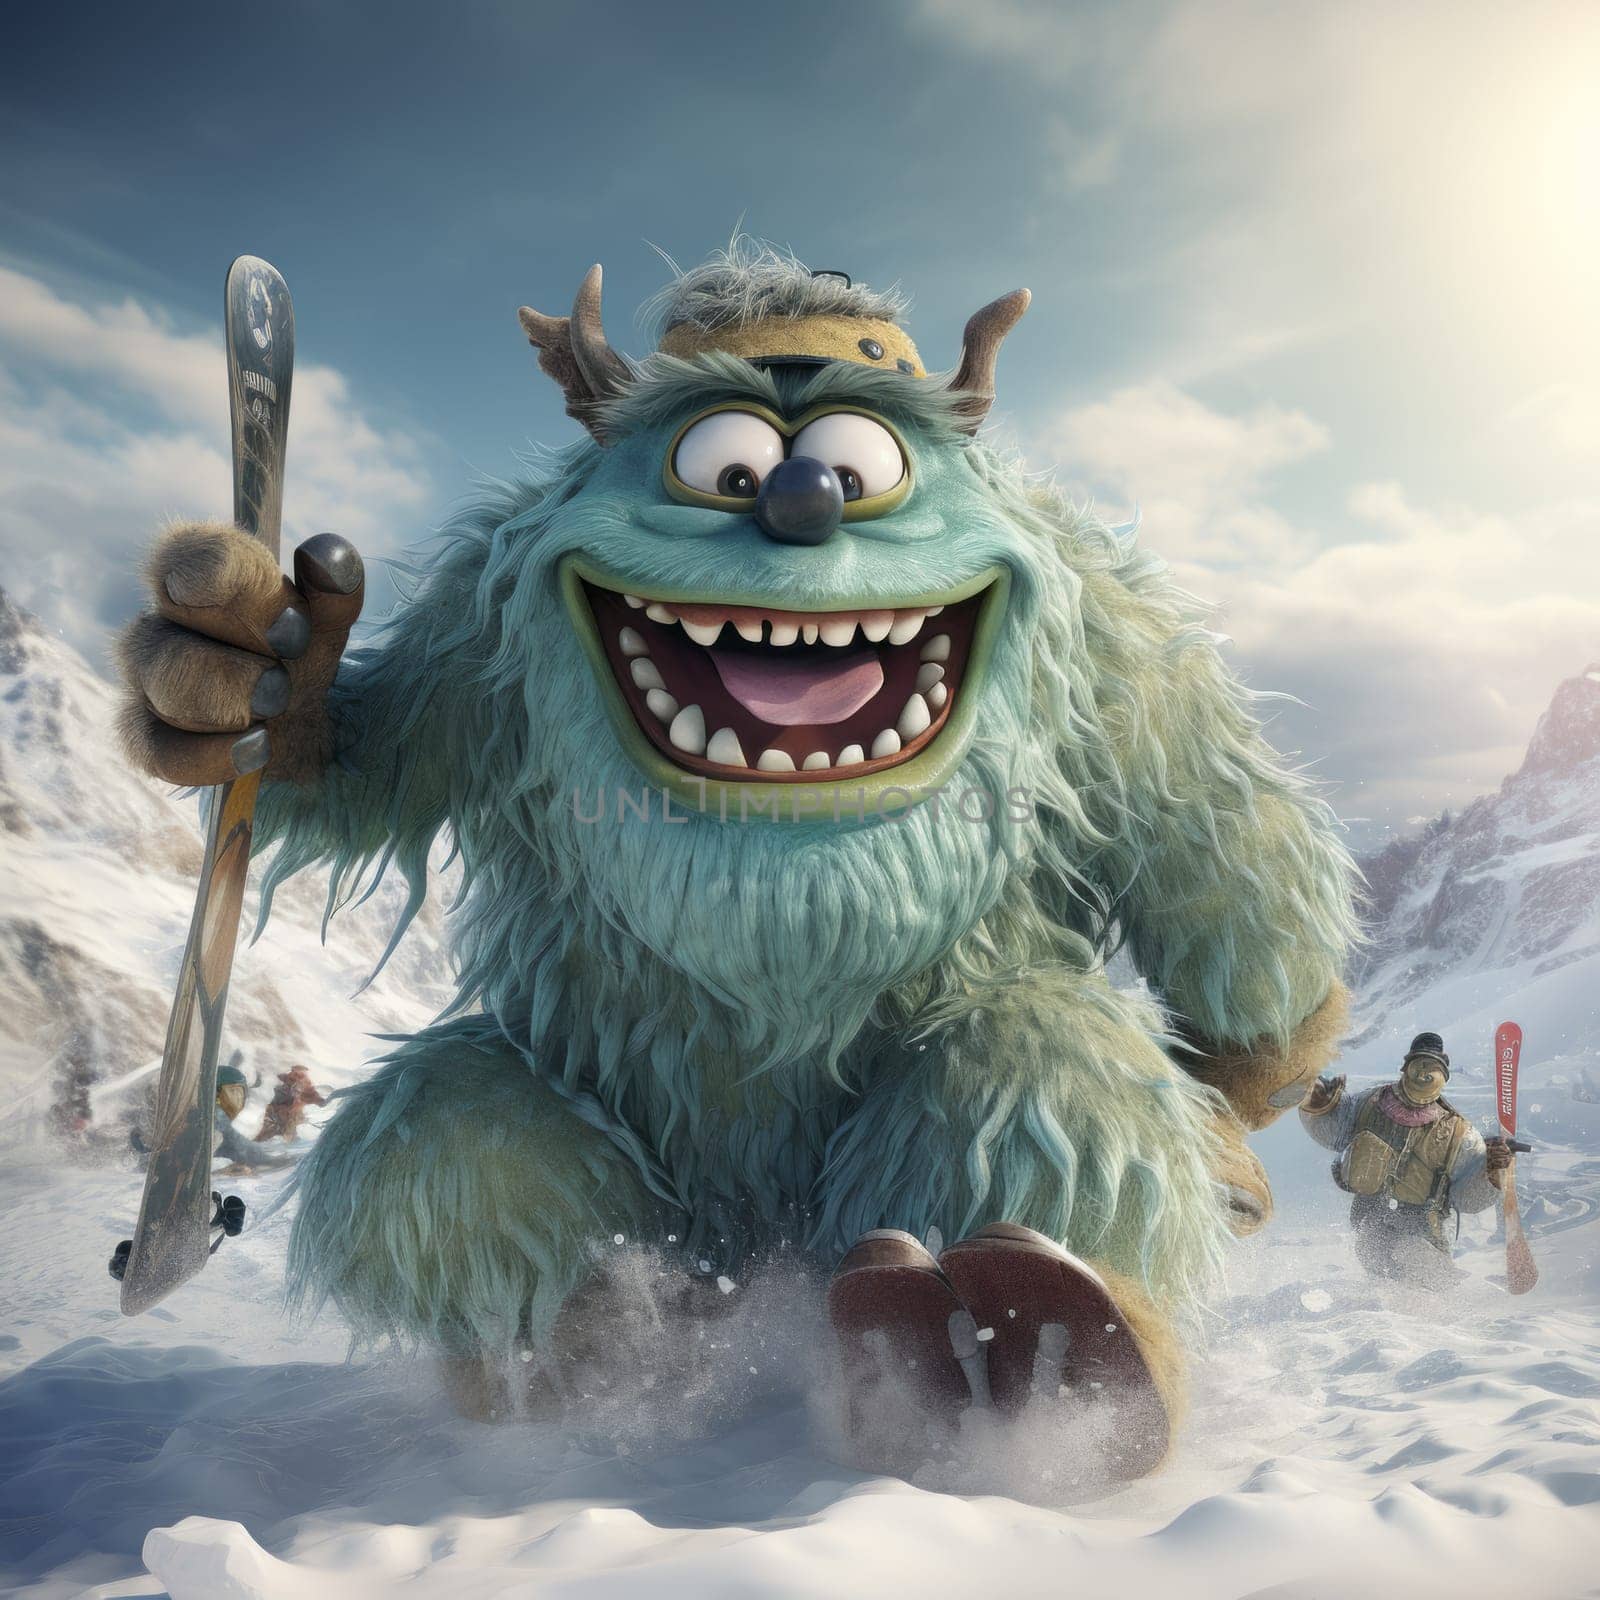 Funny happy monster with blue fur holding a ski in its paw, running away on a snowy slope.